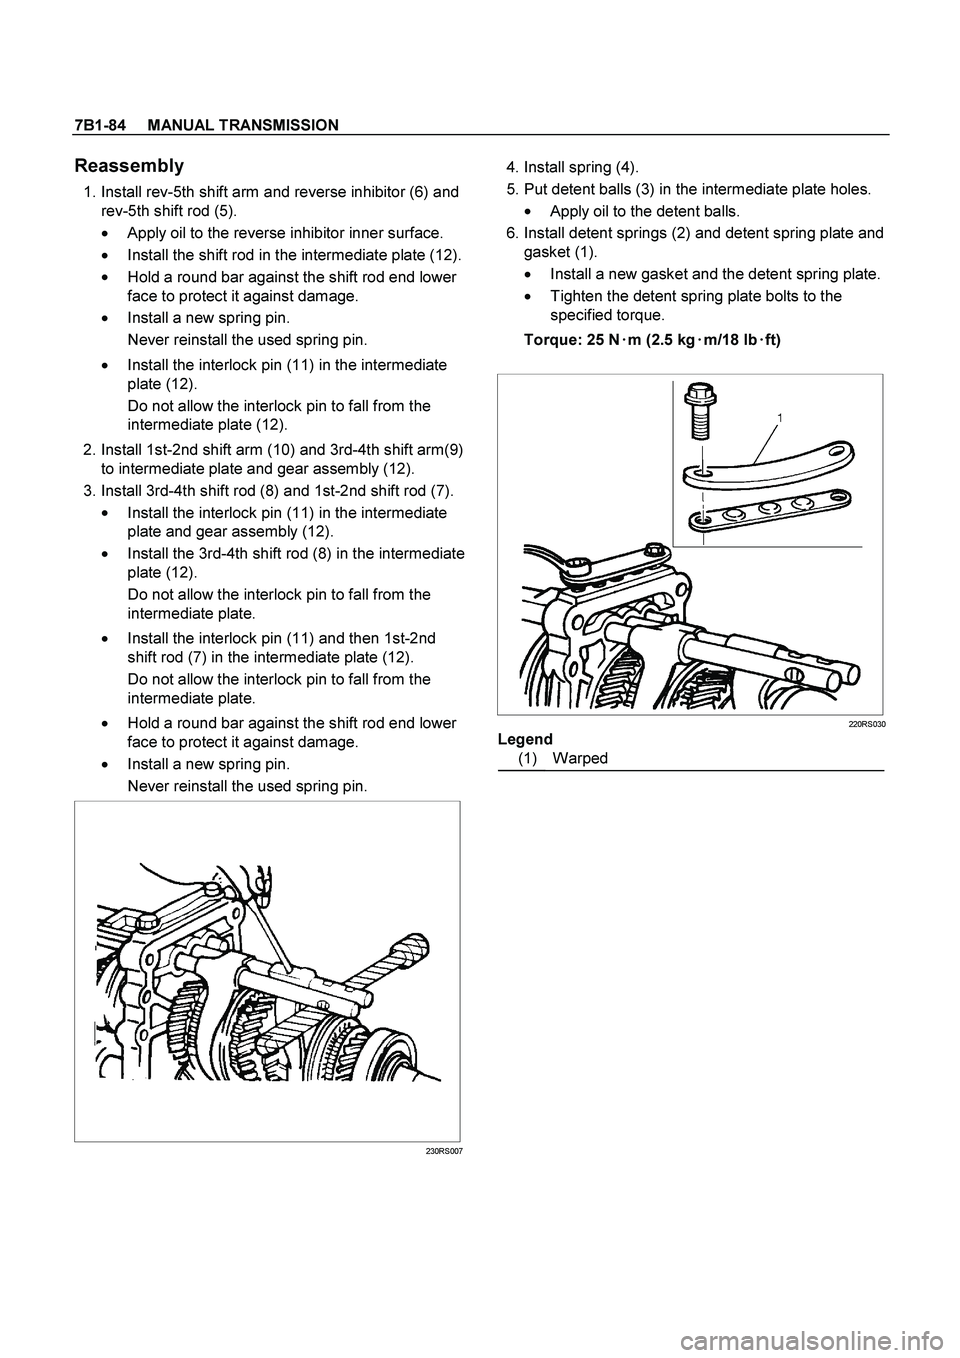 ISUZU TF SERIES 2004  Workshop Manual 7B1-84     MANUAL TRANSMISSION
 
Reassembly 
  1. Install rev-5th shift arm and reverse inhibitor (6) and 
rev-5th shift rod (5). 
  Apply oil to the reverse inhibitor inner surface. 
  Install the 